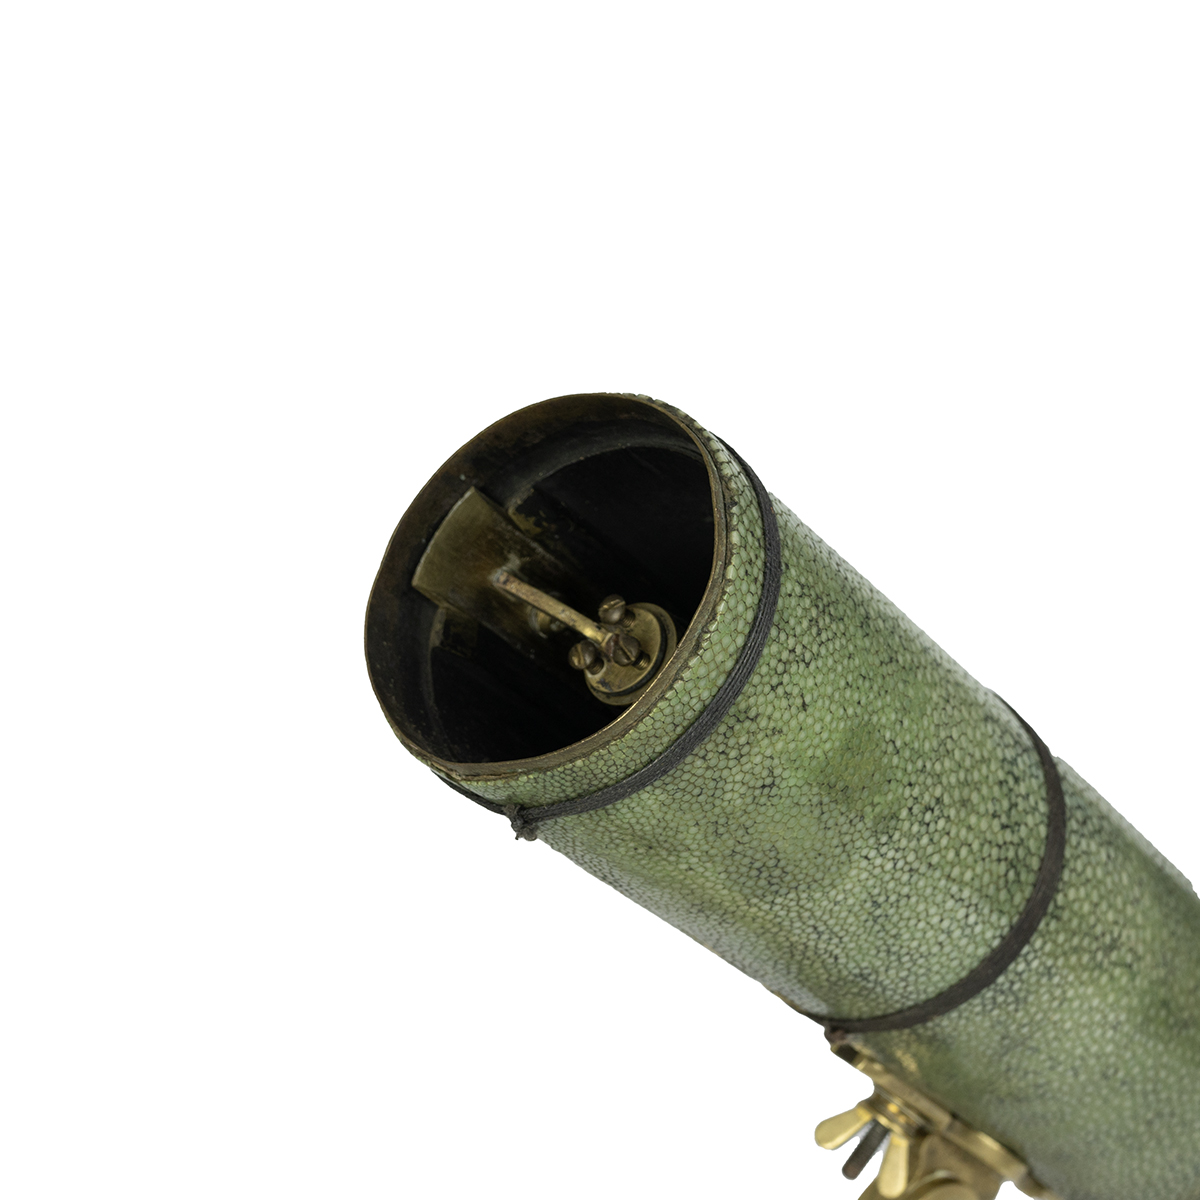 19th Century brass reflecting telescope on tripod stand with shagreen sleeve. In original fitted ... - Image 5 of 5